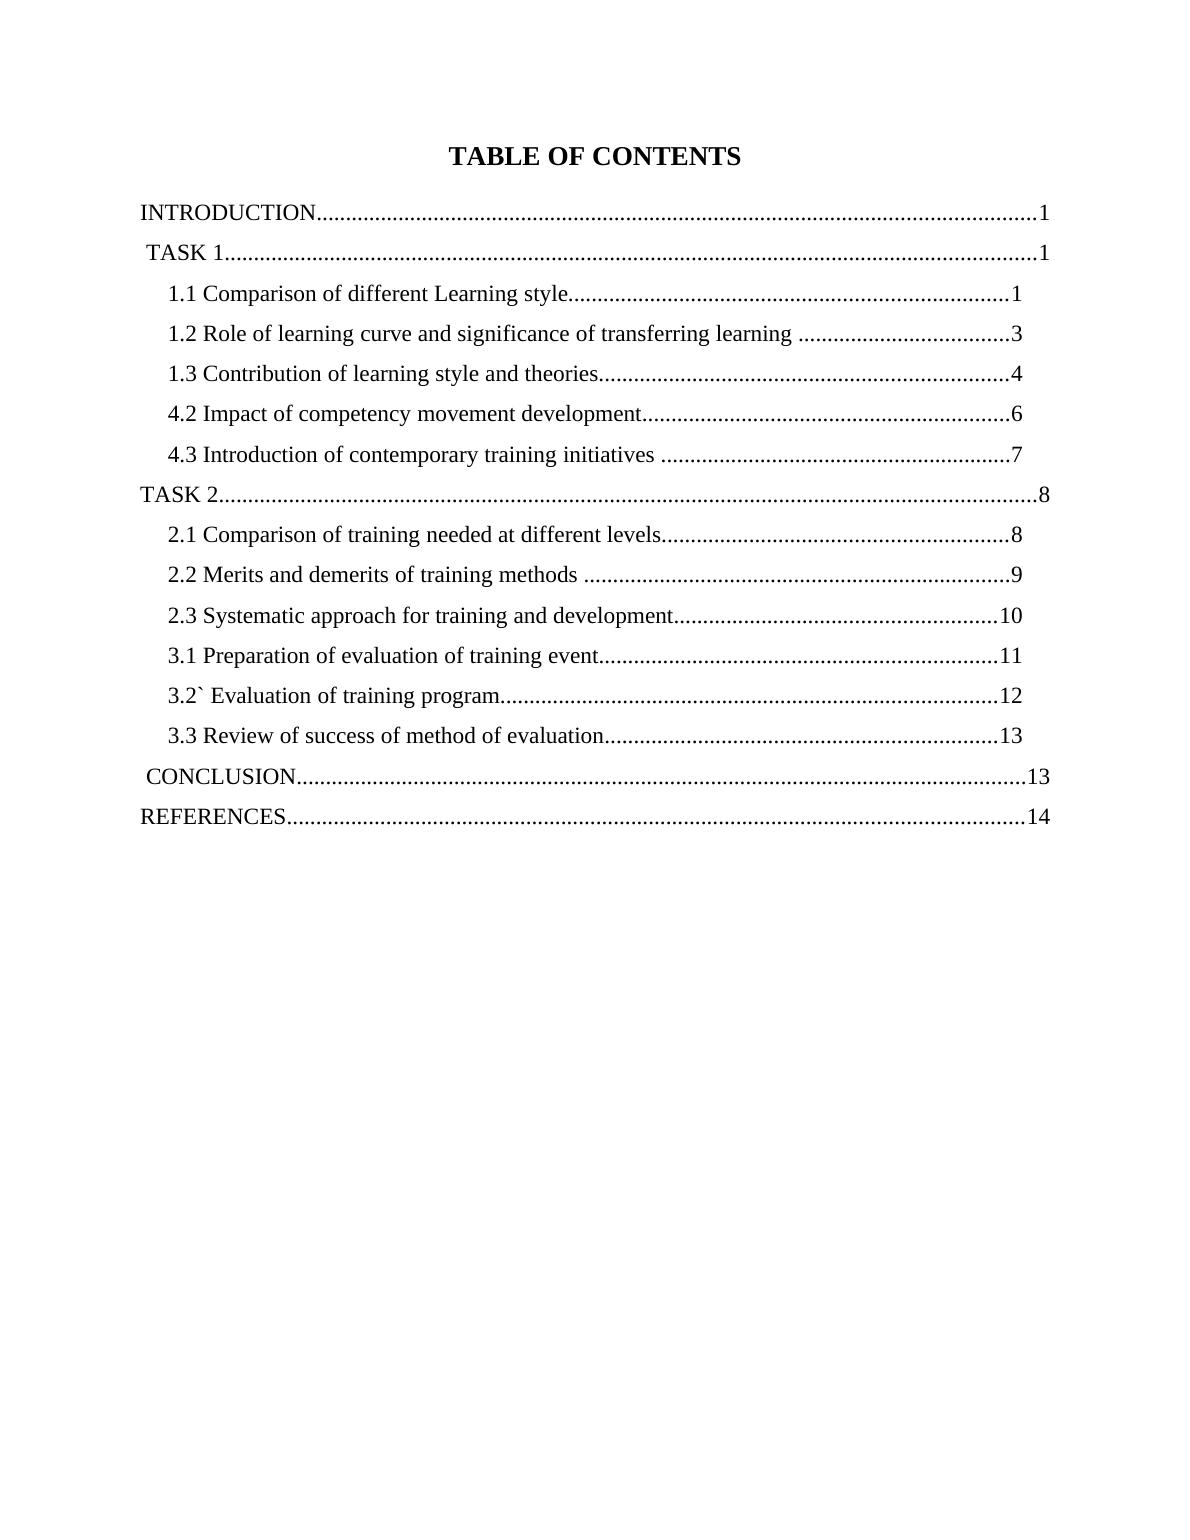 Report on Human Resource Management of Sun Count Ltd_2